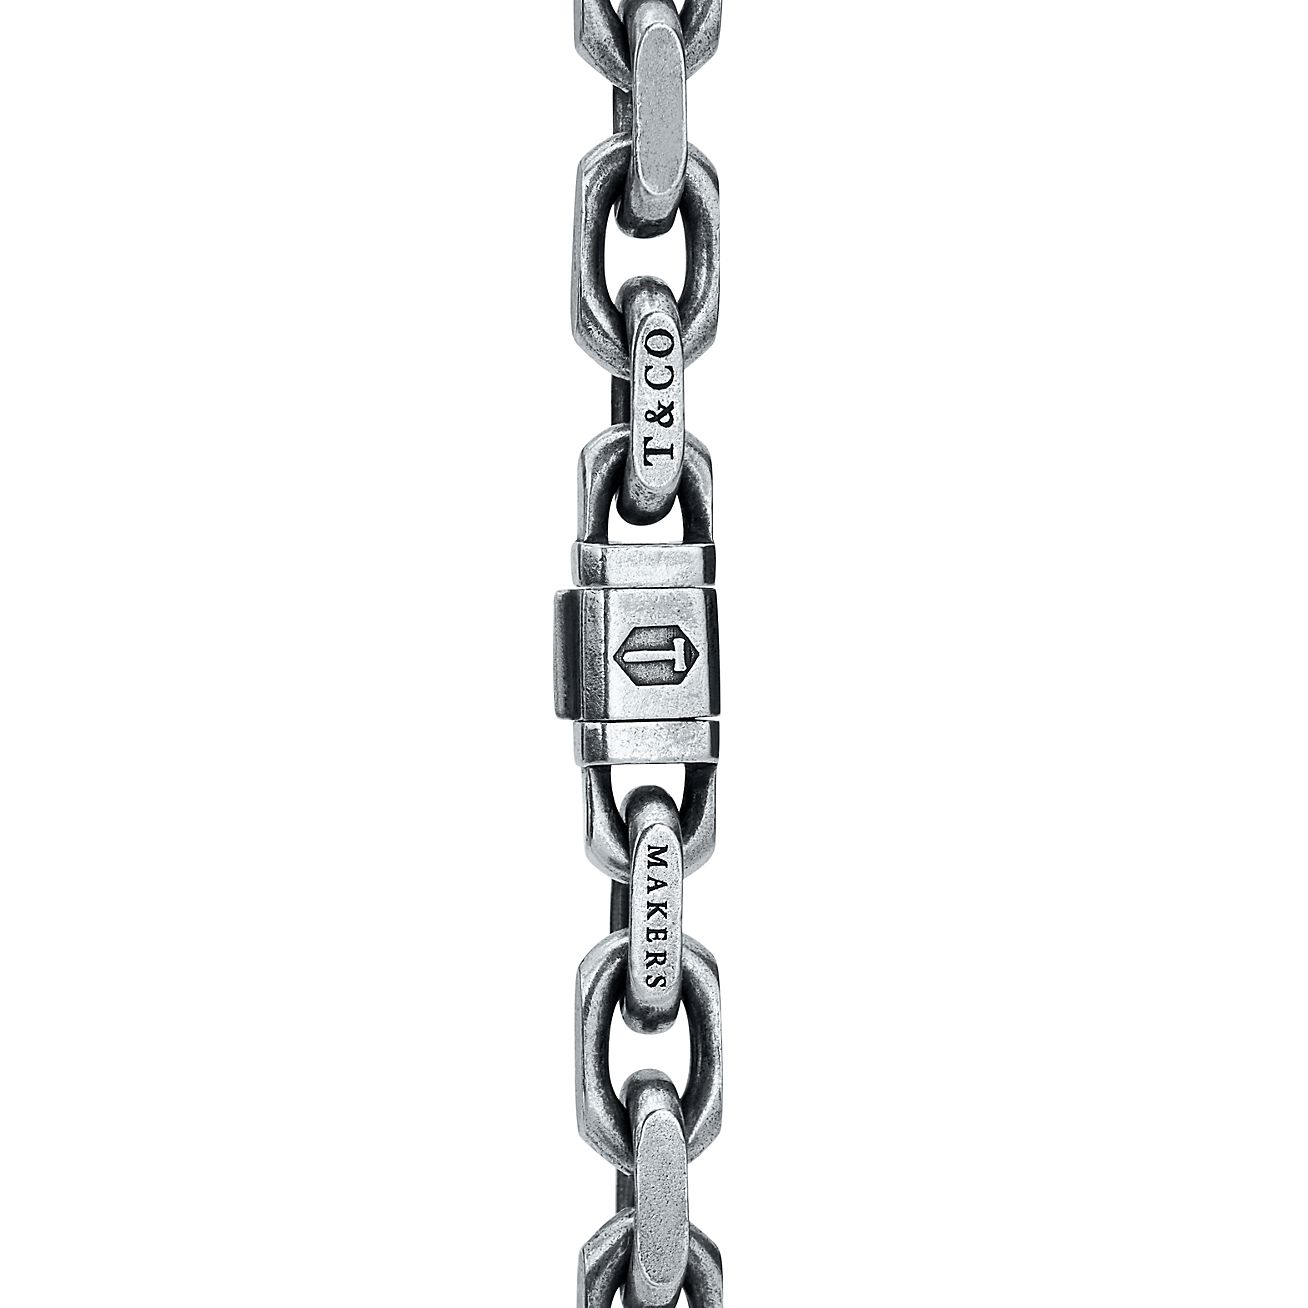 Tiffany 1837® Makers Tumbled Chain Necklace in Sterling Silver, 24"